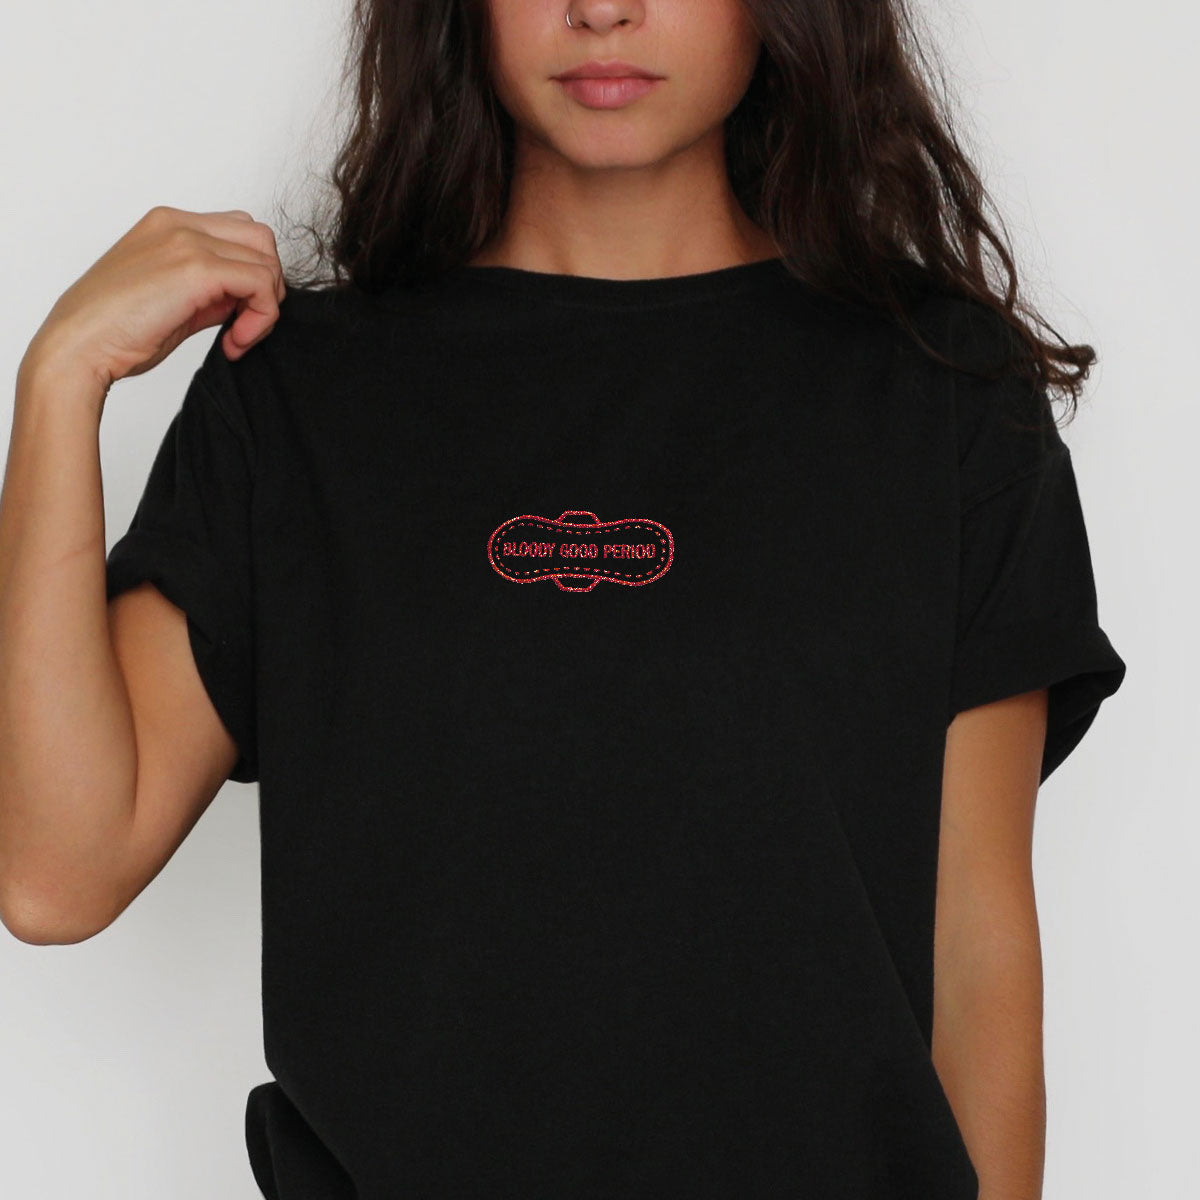 Glitter Embroidered Bloody Good Period T-Shirt